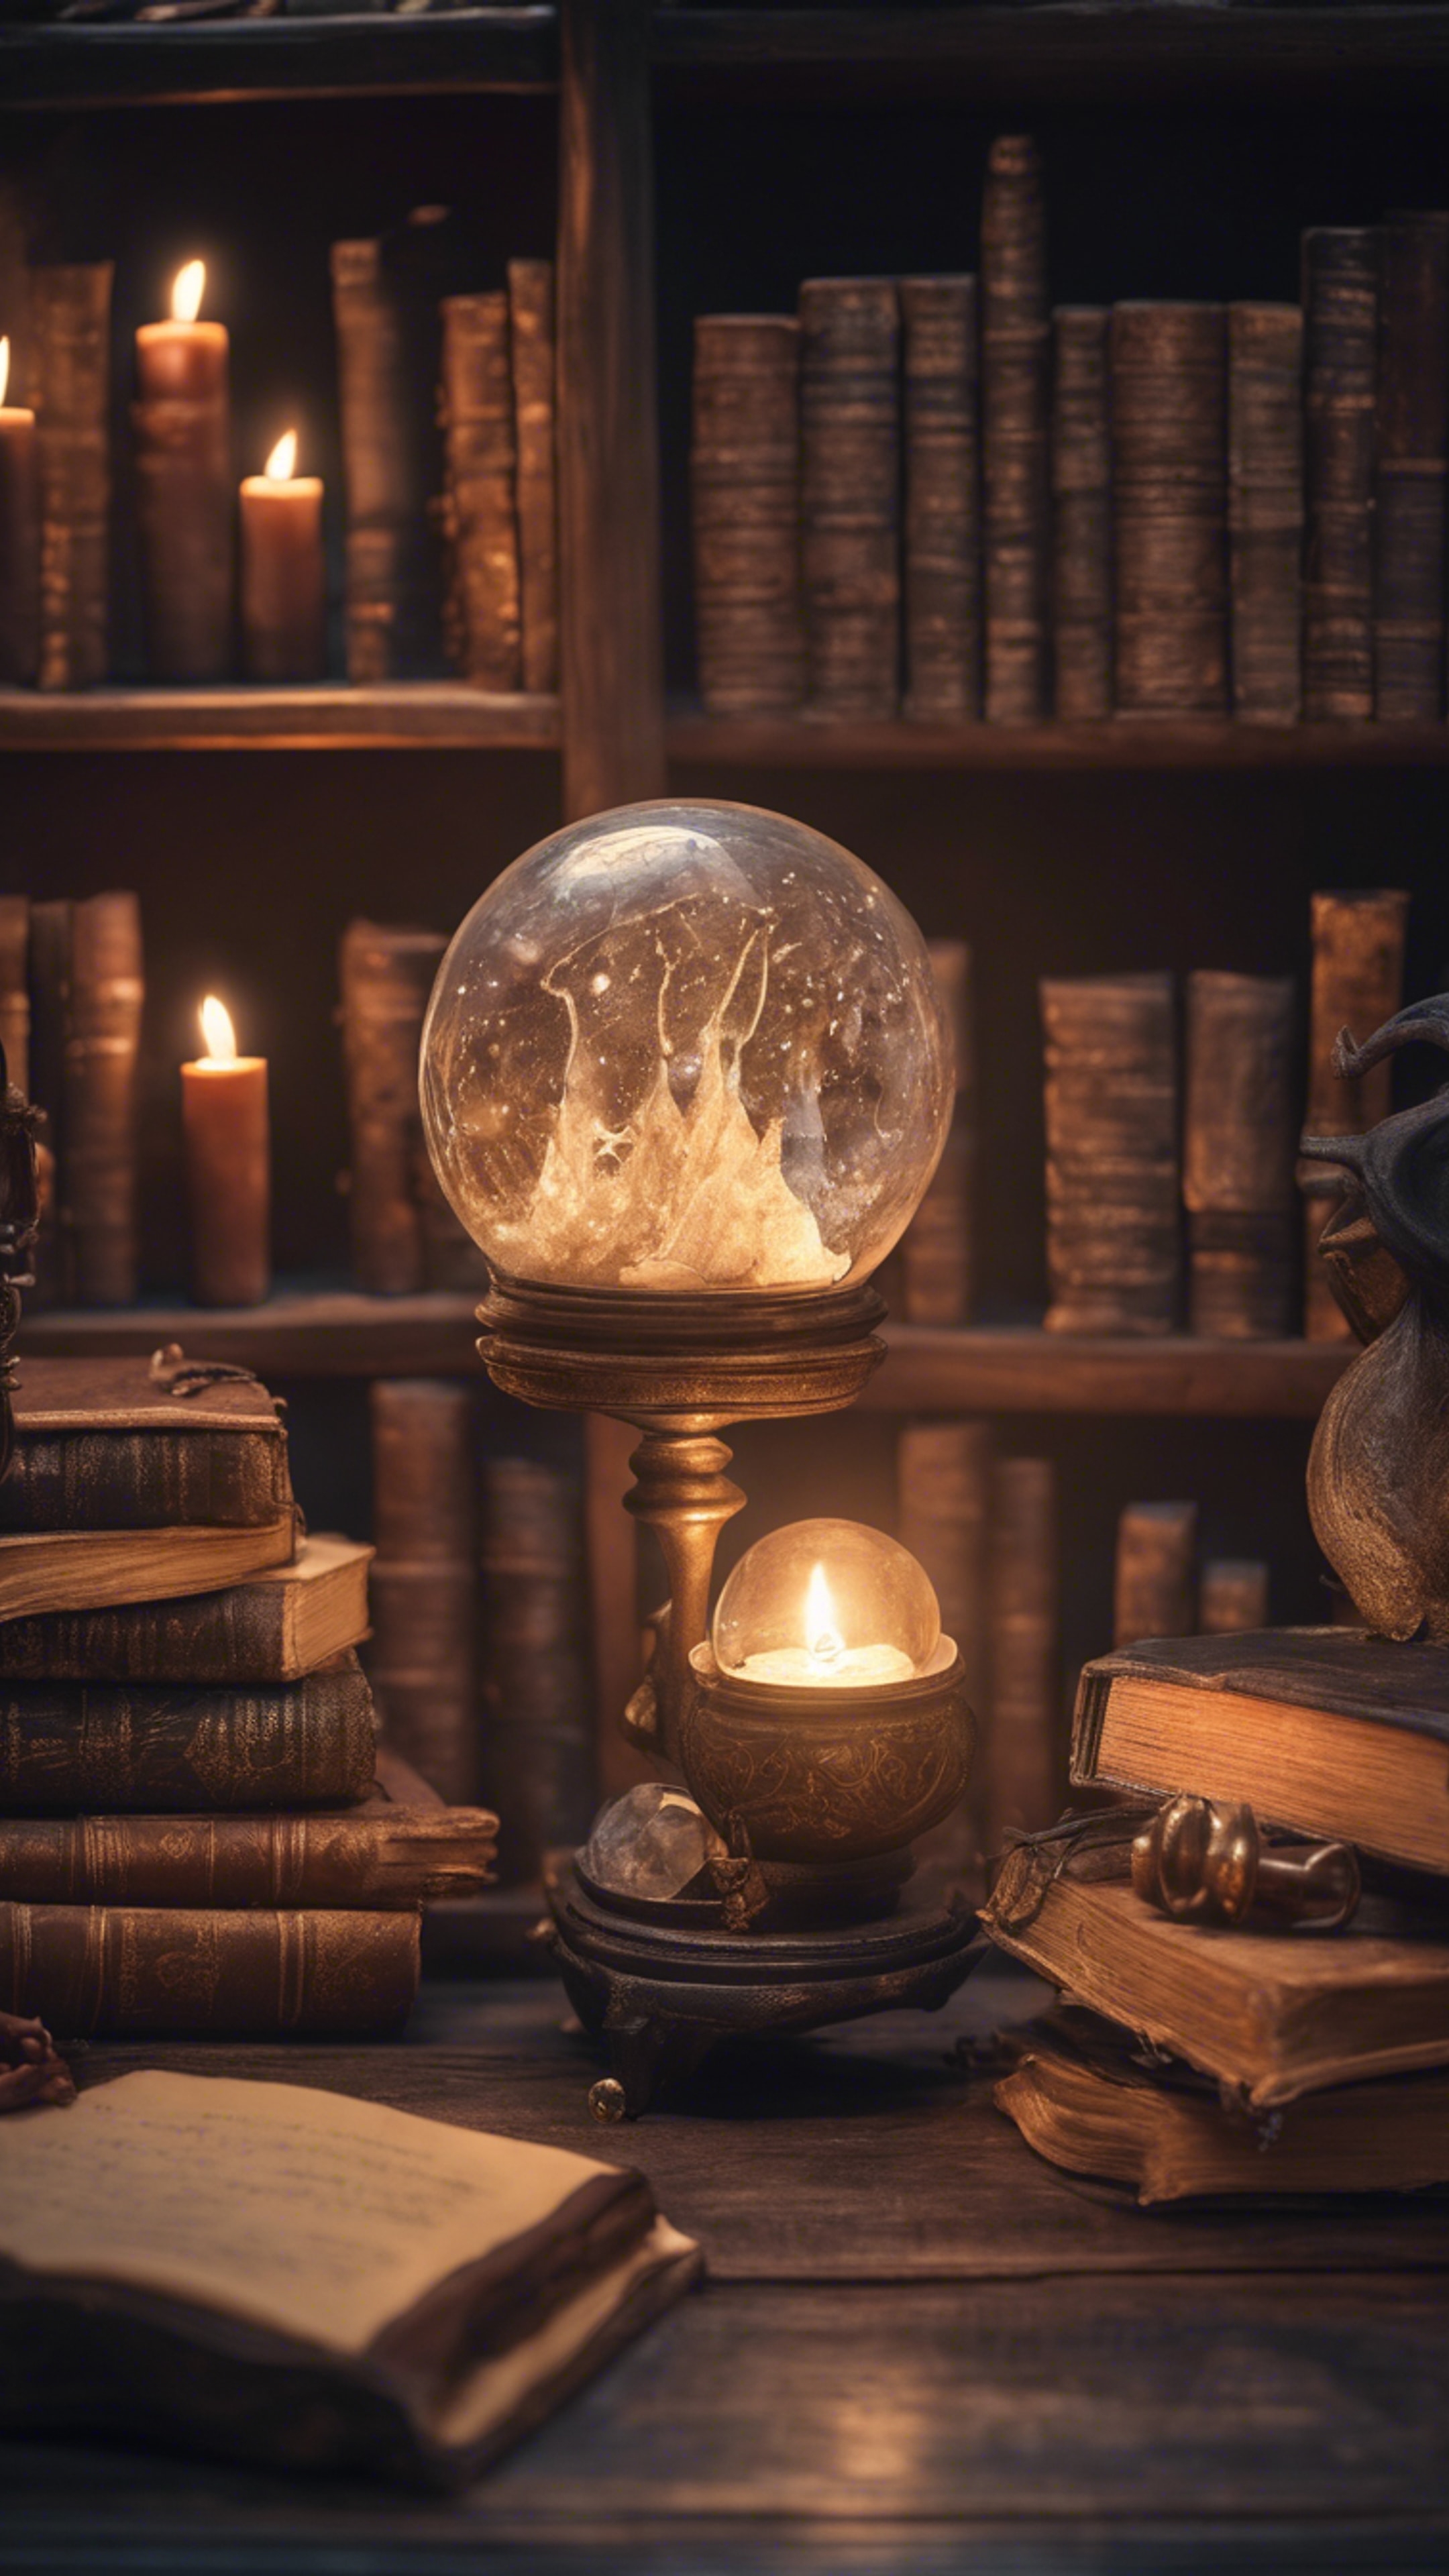 A cozy mystical scene with a wizard’s study room - magical artifacts, rows of spell books, a crystal ball, and a cauldron brewing a potion. کاغذ دیواری[df00e949c5584759a81e]